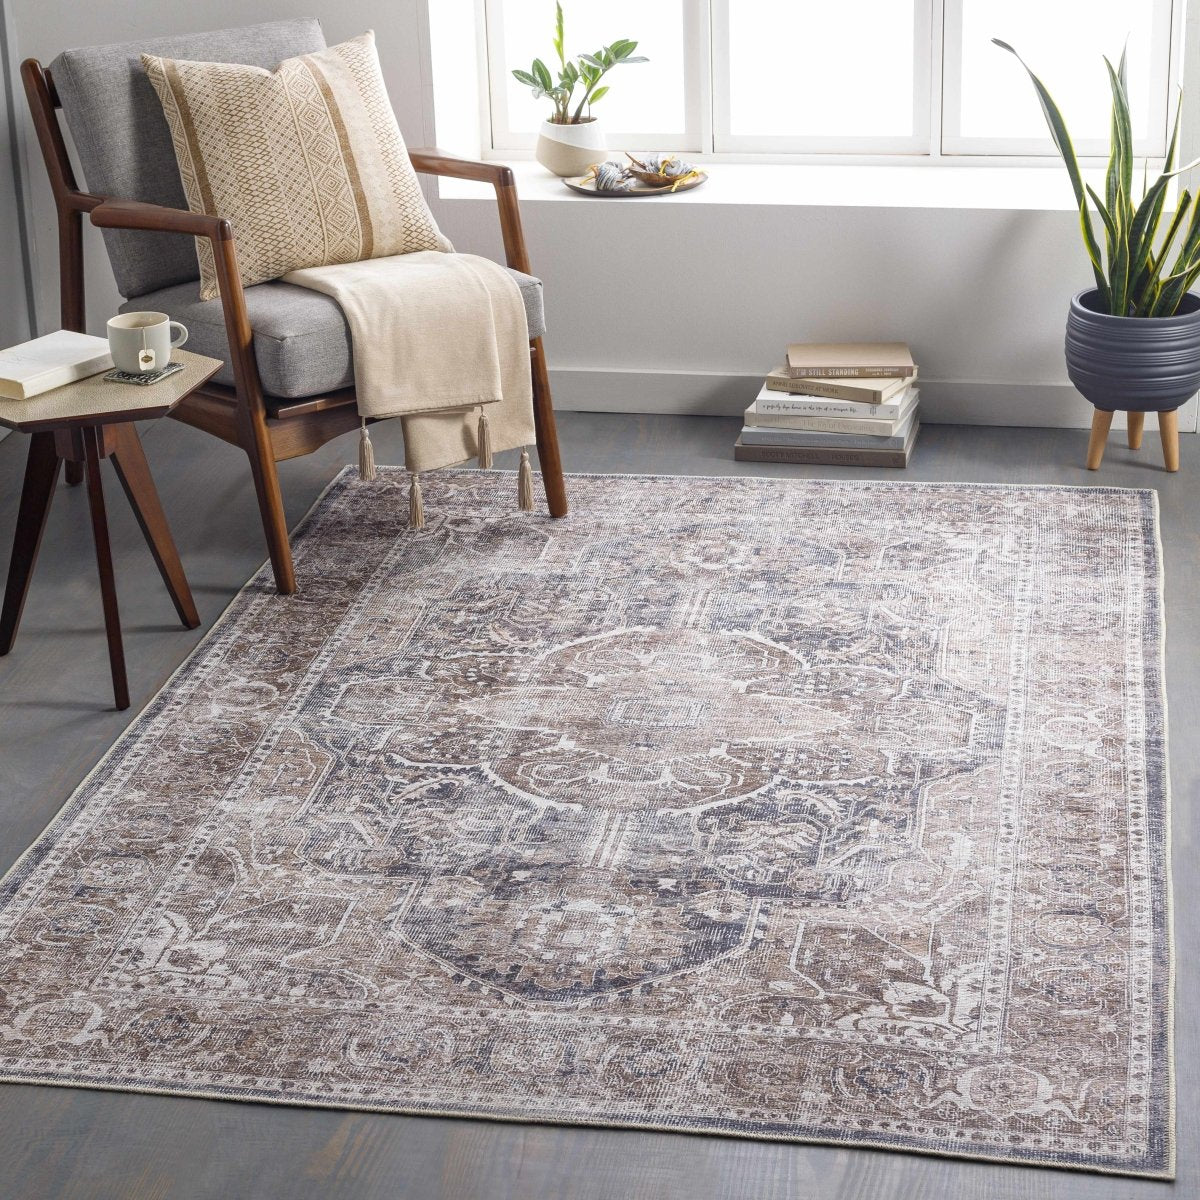 https://cdn.shopify.com/s/files/1/0275/1876/3088/products/mignon-washable-area-rug-369905_1445x.jpg?v=1699077992